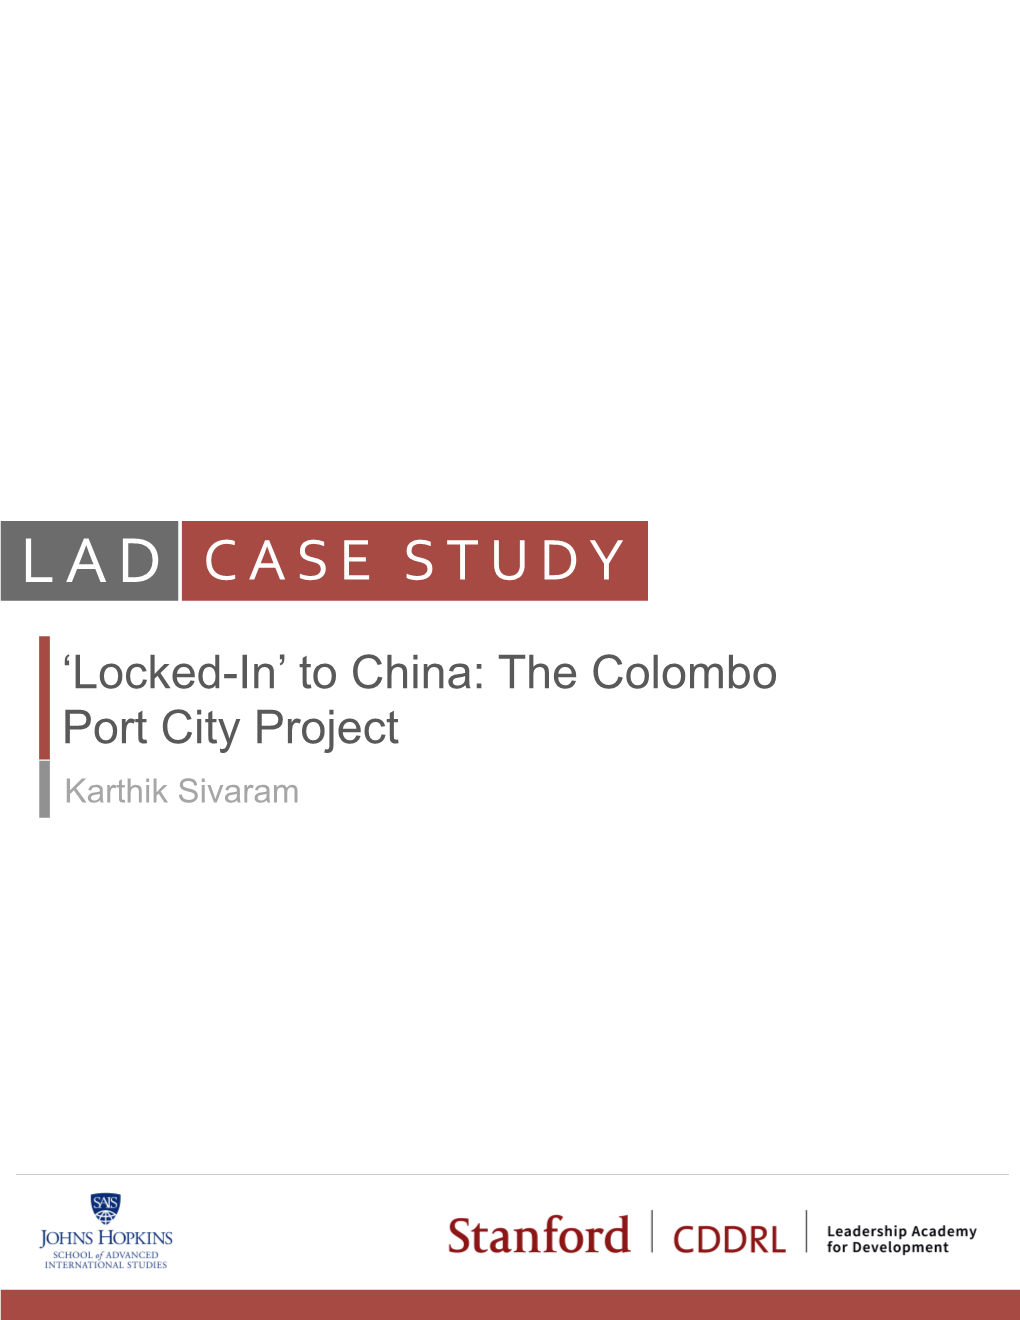 'Locked-In' to China: the Colombo Port City Project